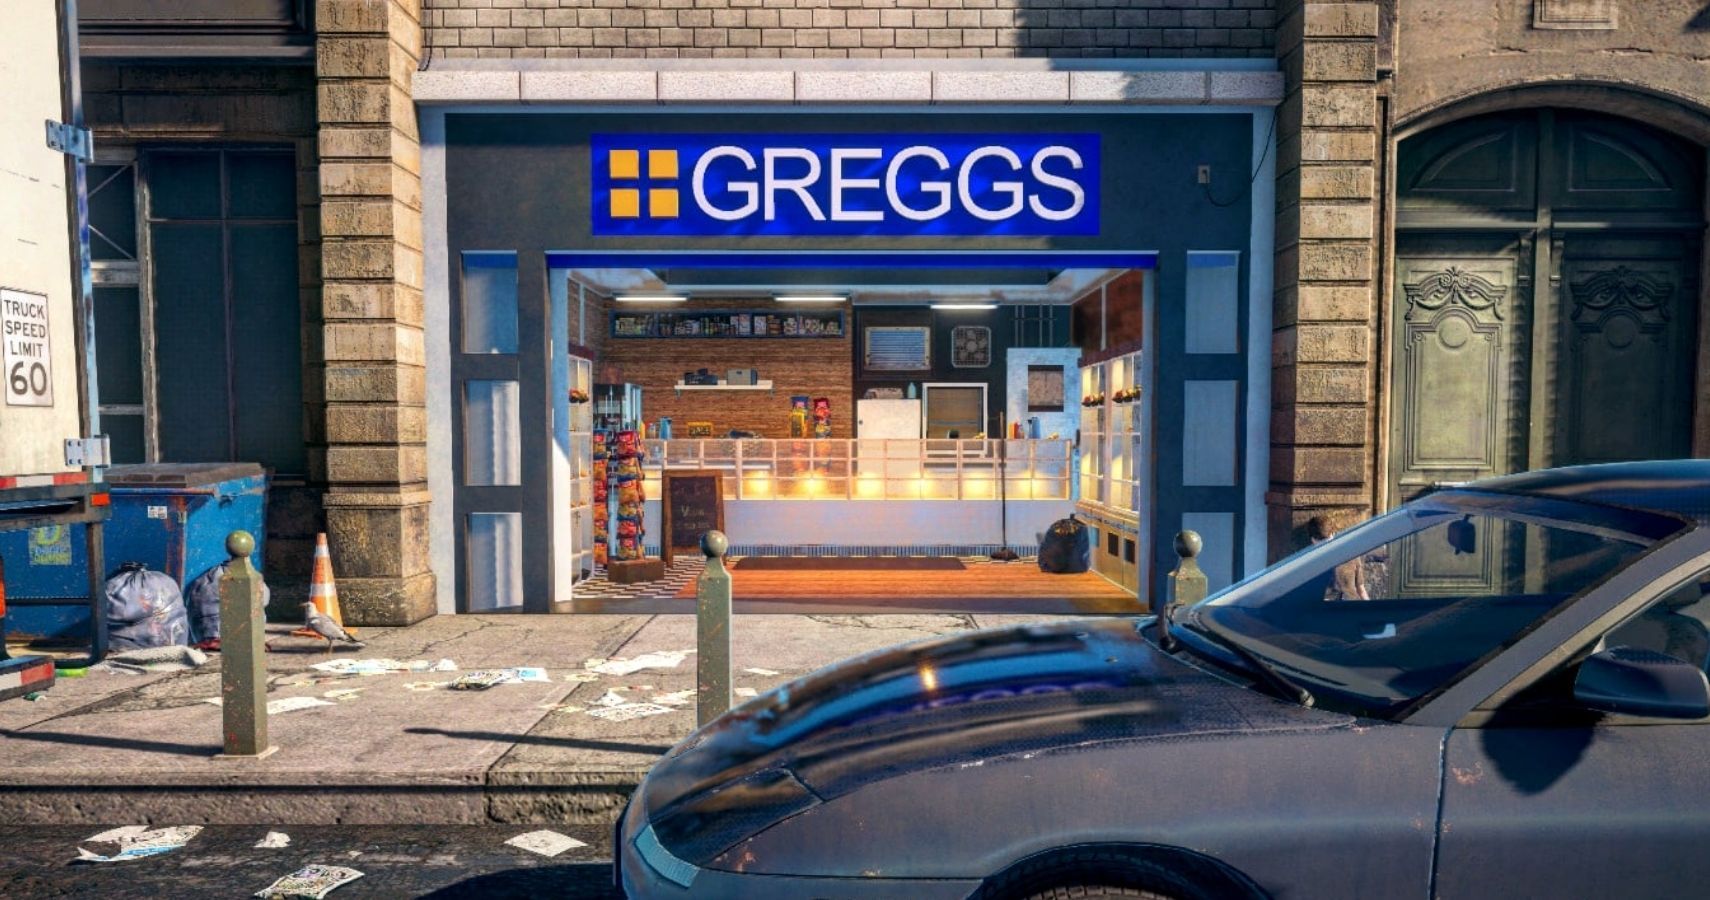 A British high street with a Greggs open. The street looks messy, with trash on the floor.